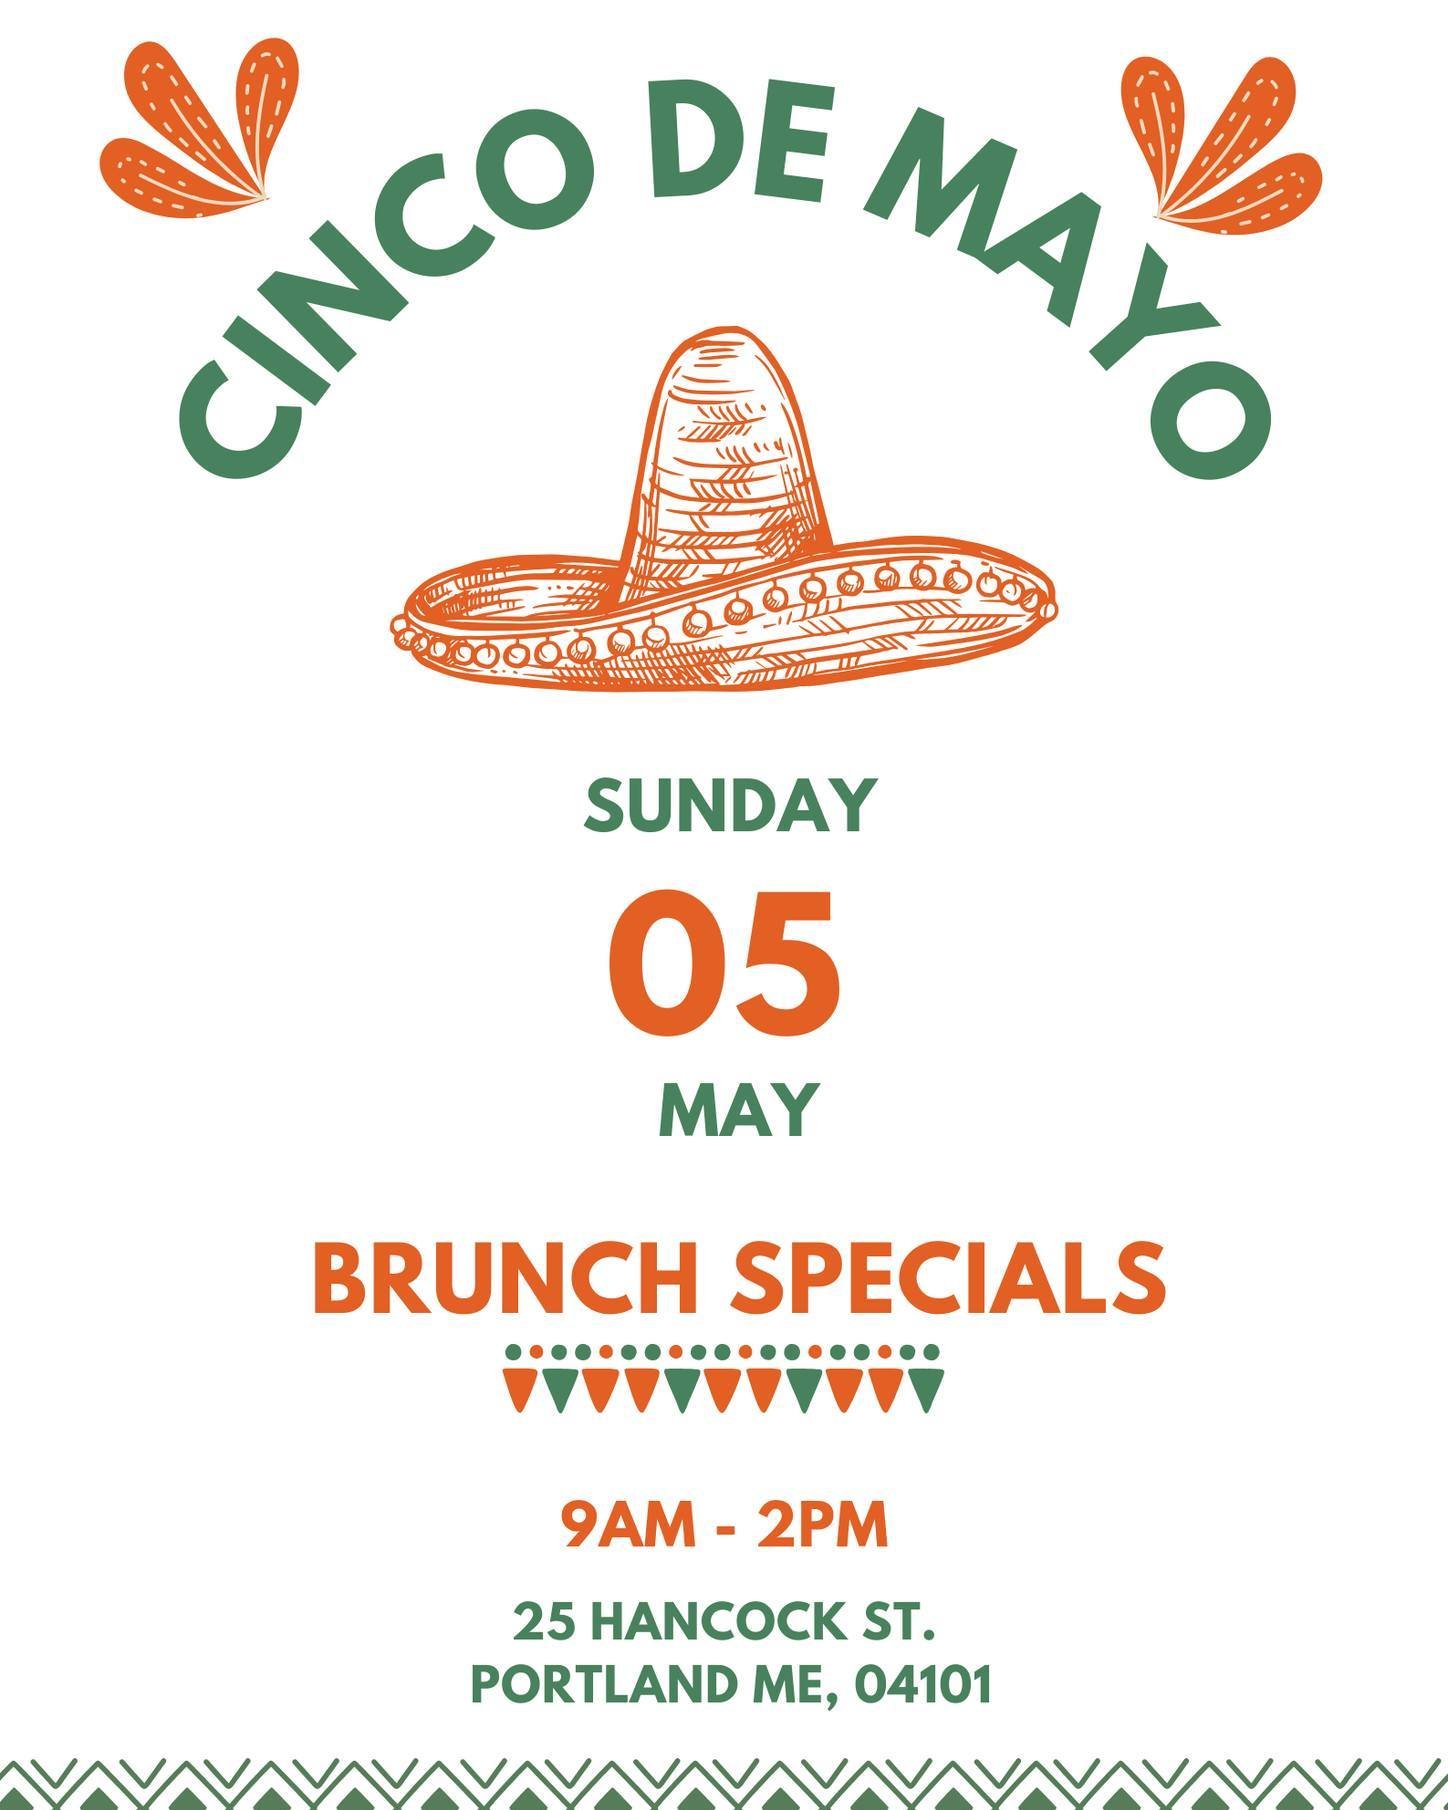 Join us at ALTO Terrace Bar + Kitchen to spice up your Cinco de Mayo celebration! 🎉 

From 9AM - 2PM, indulge in our irresistible brunch specials featuring Huevos Rancheros, Chorizo Breakfast Burrito, and Churro French Toast. Wash it all down with o